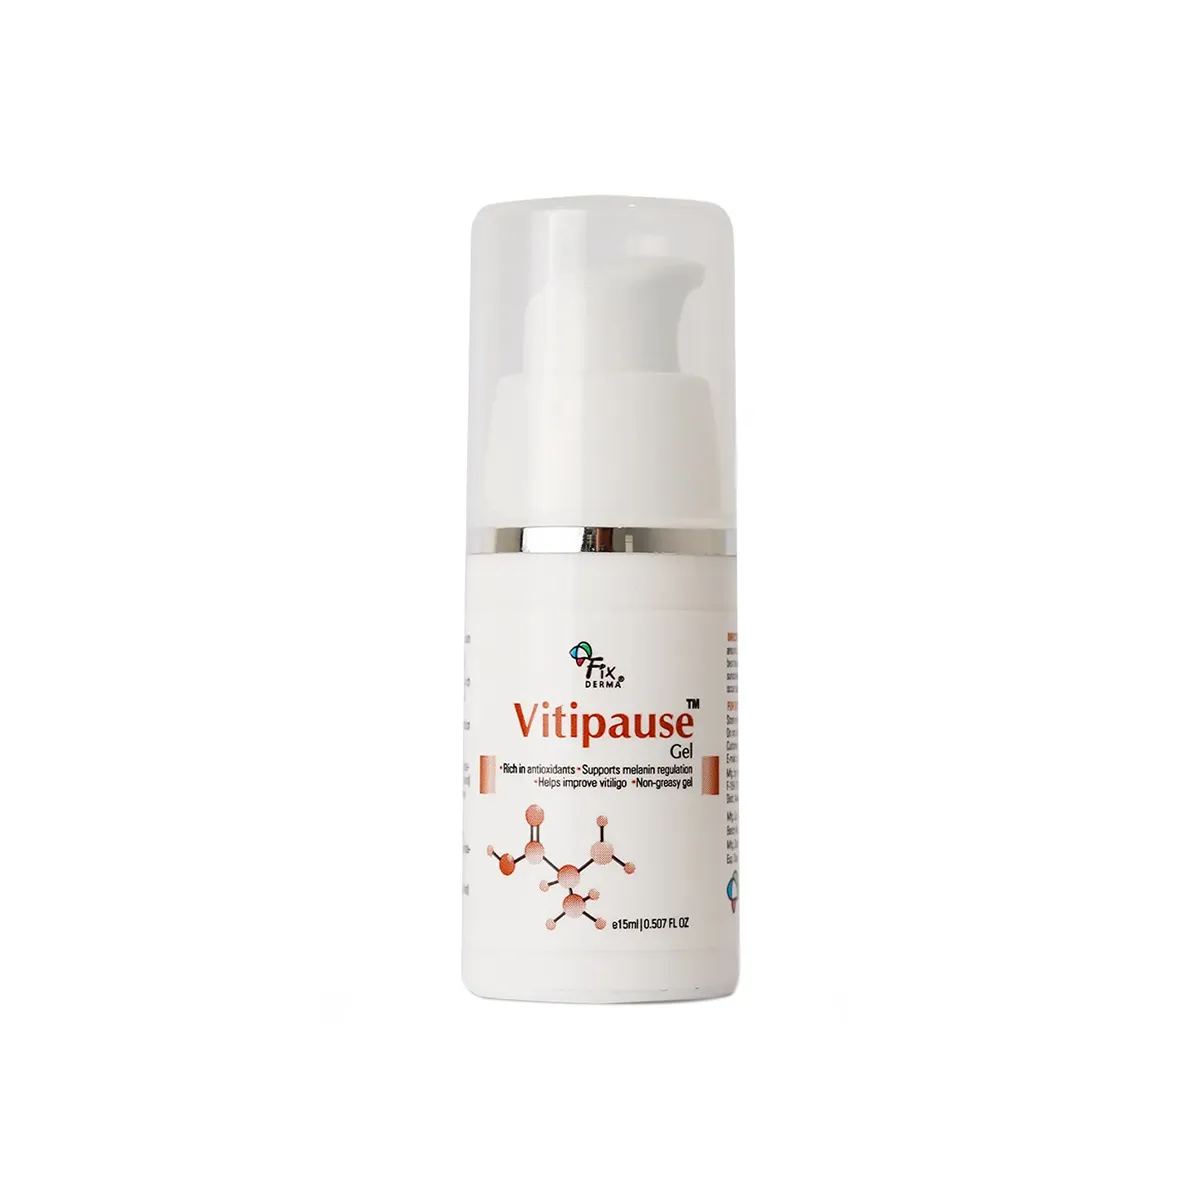 First product image of Fixderma Vitipause Gel 15ml